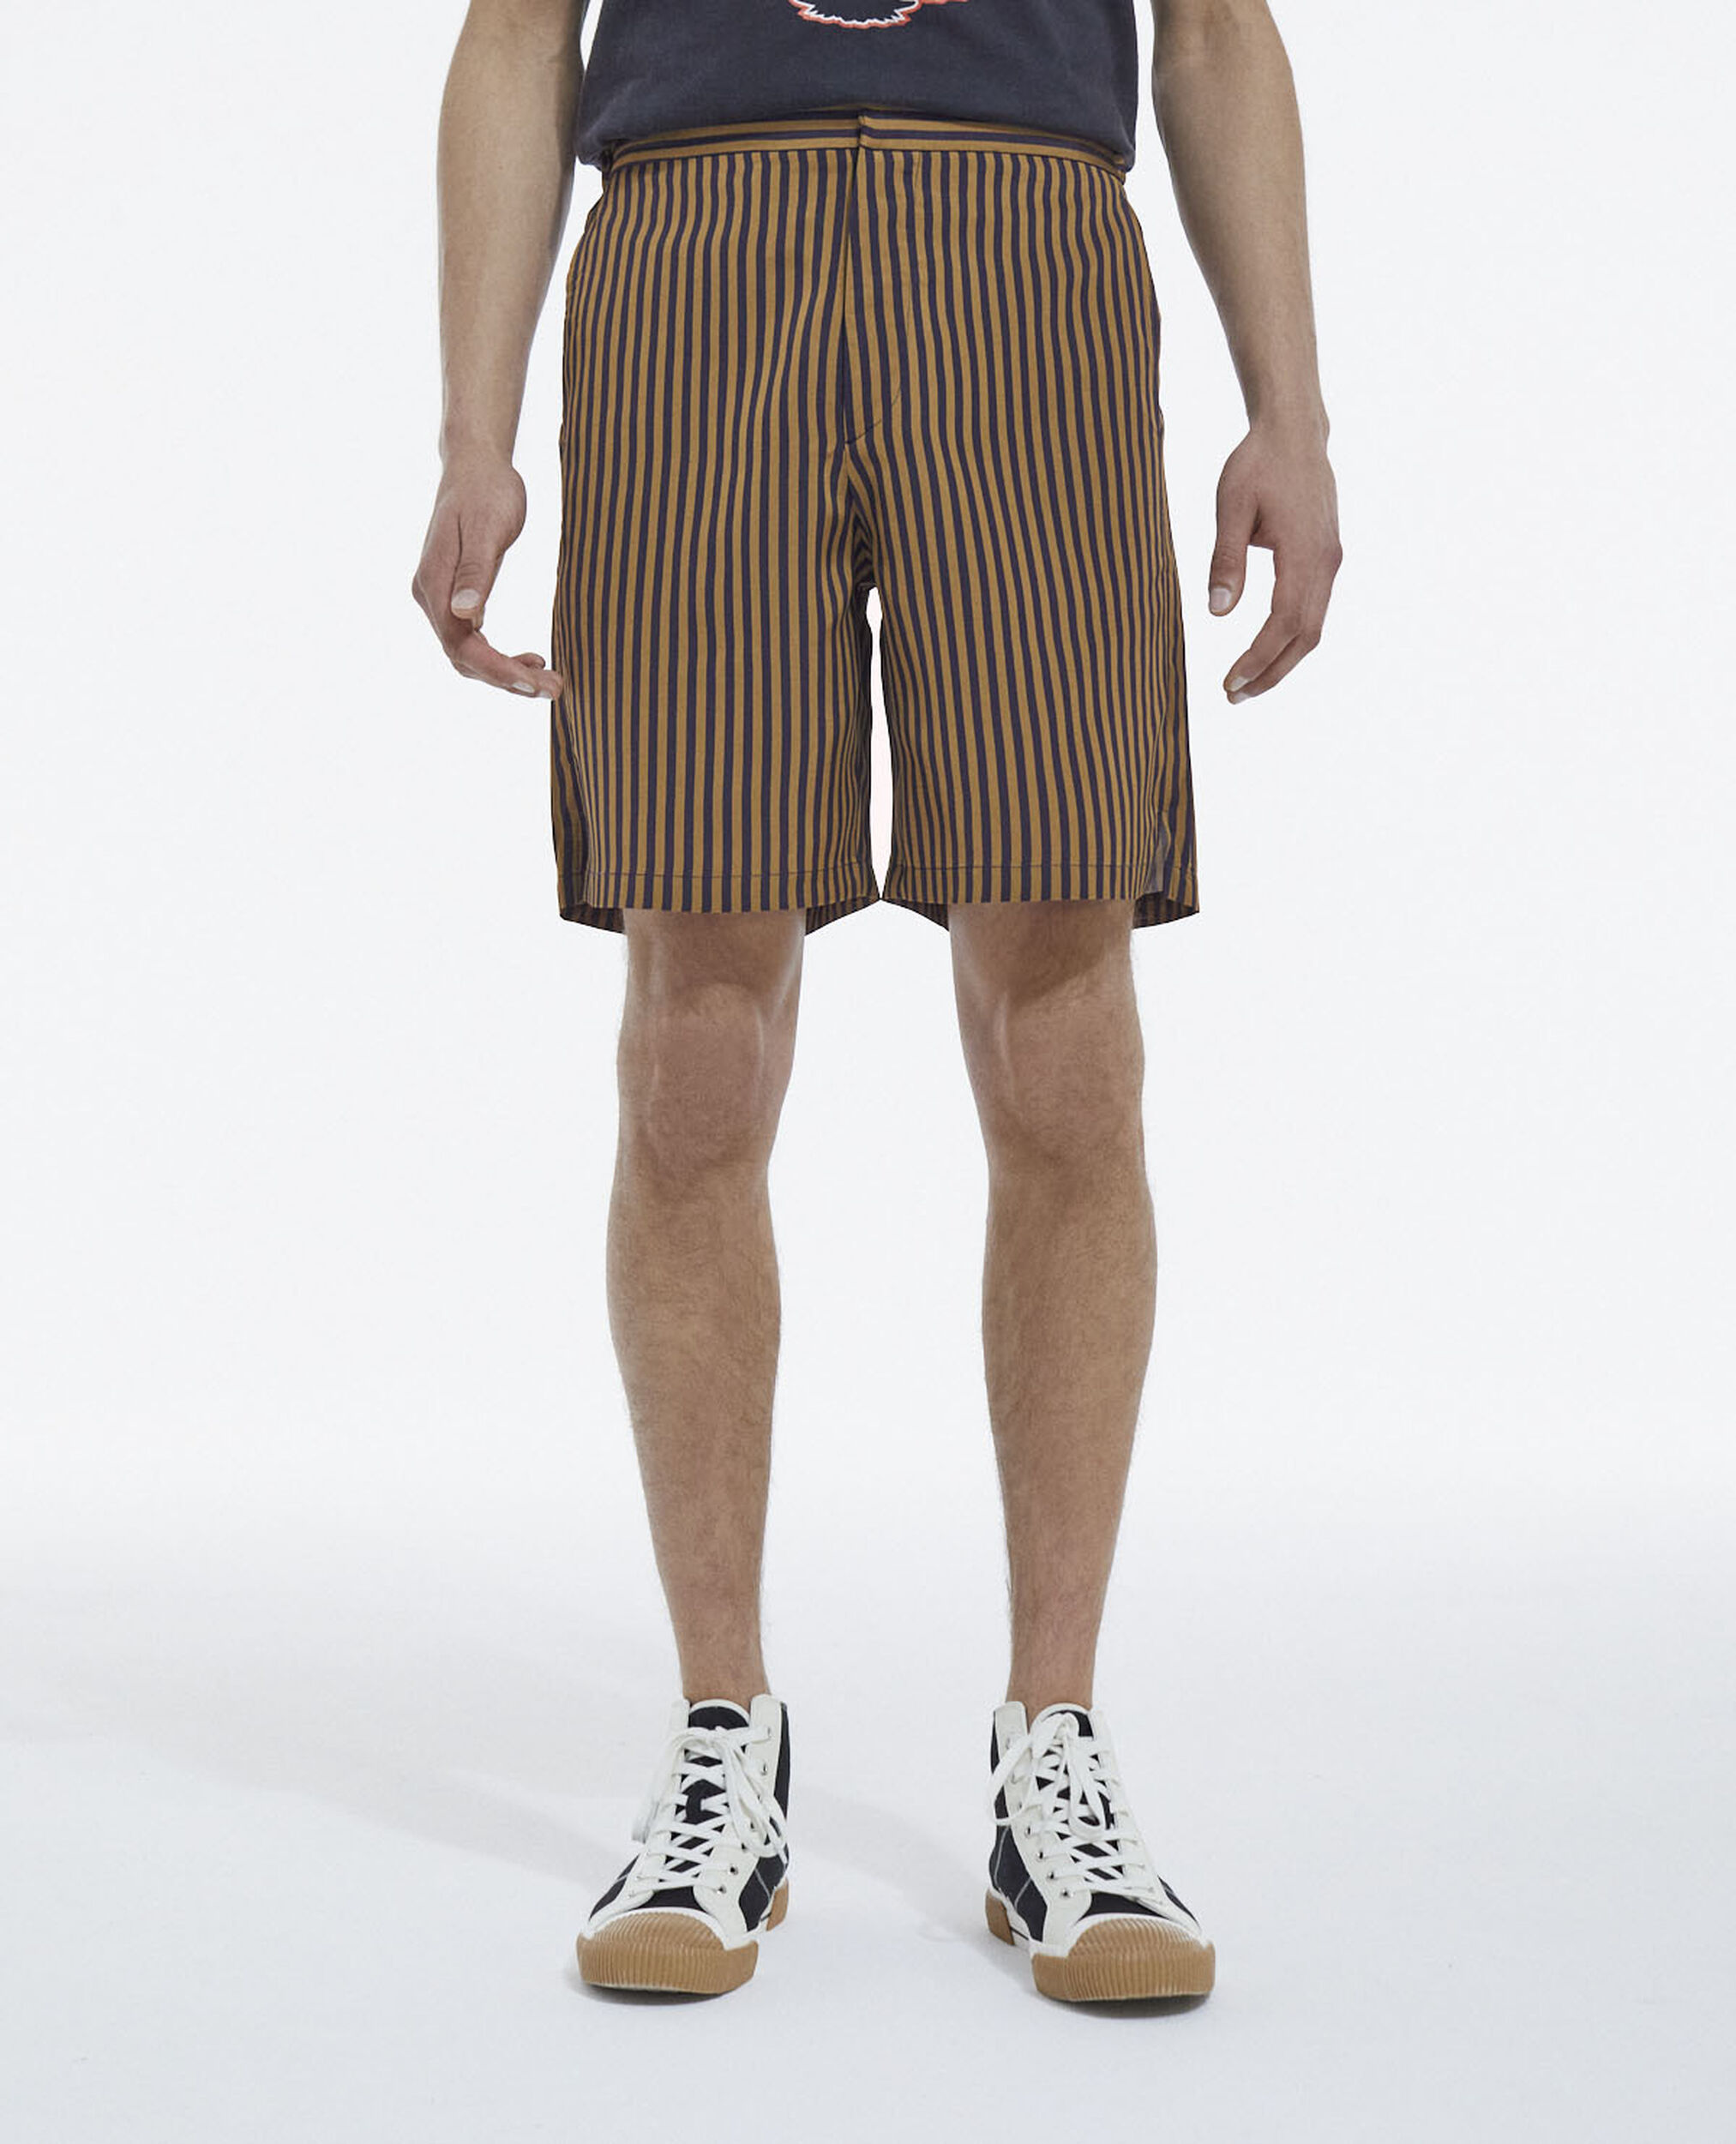 Flowing navy blue striped shorts, NAVY / BROWN, hi-res image number null